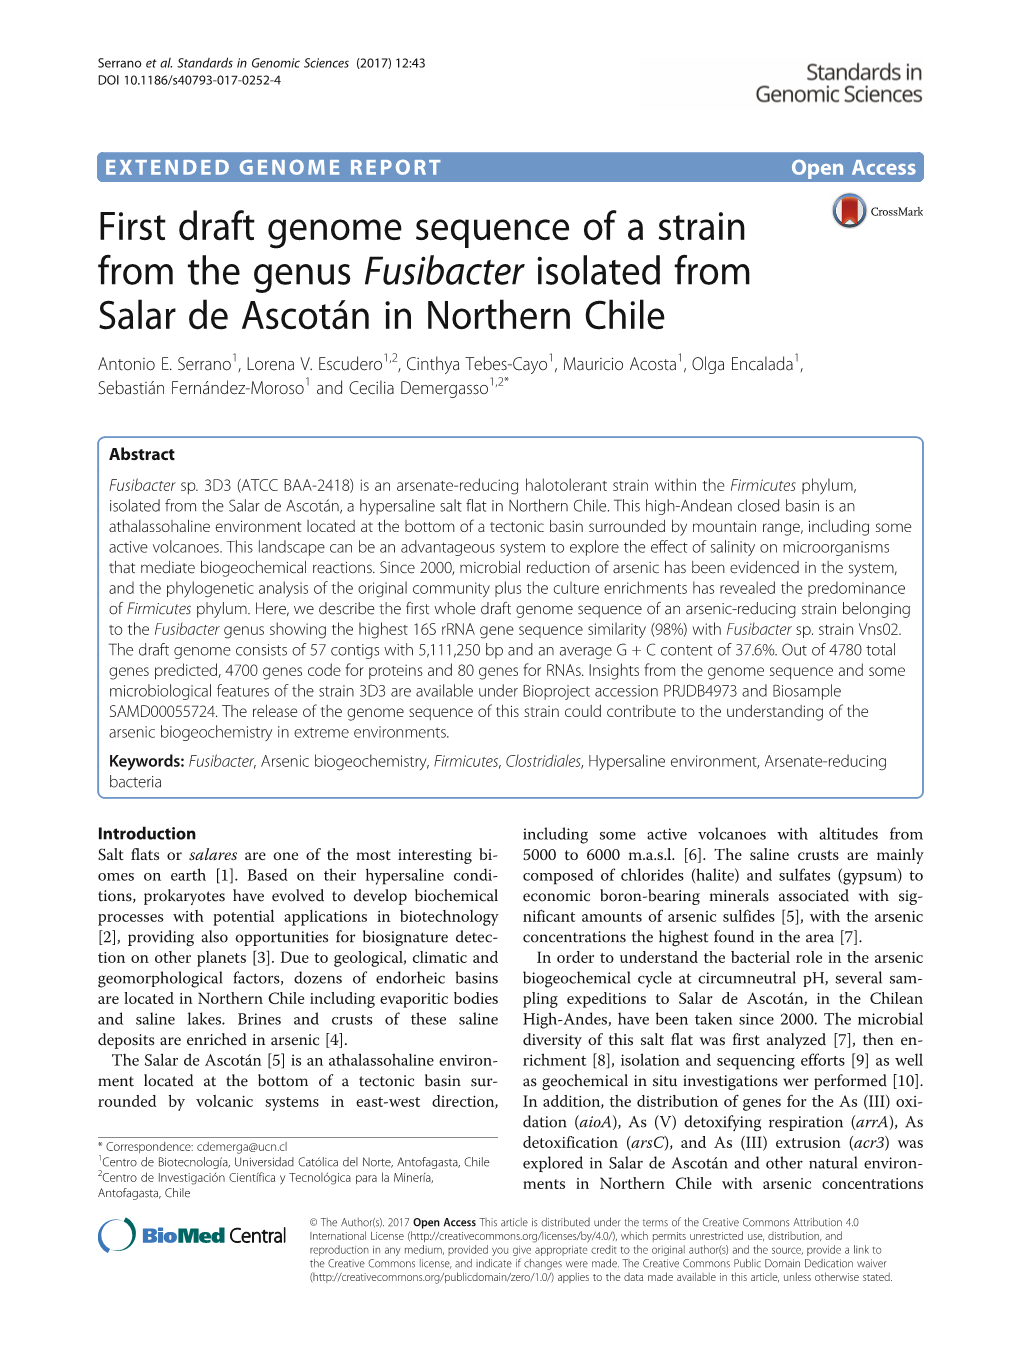 First Draft Genome Sequence of a Strain from the Genus Fusibacter Isolated from Salar De Ascotán in Northern Chile Antonio E